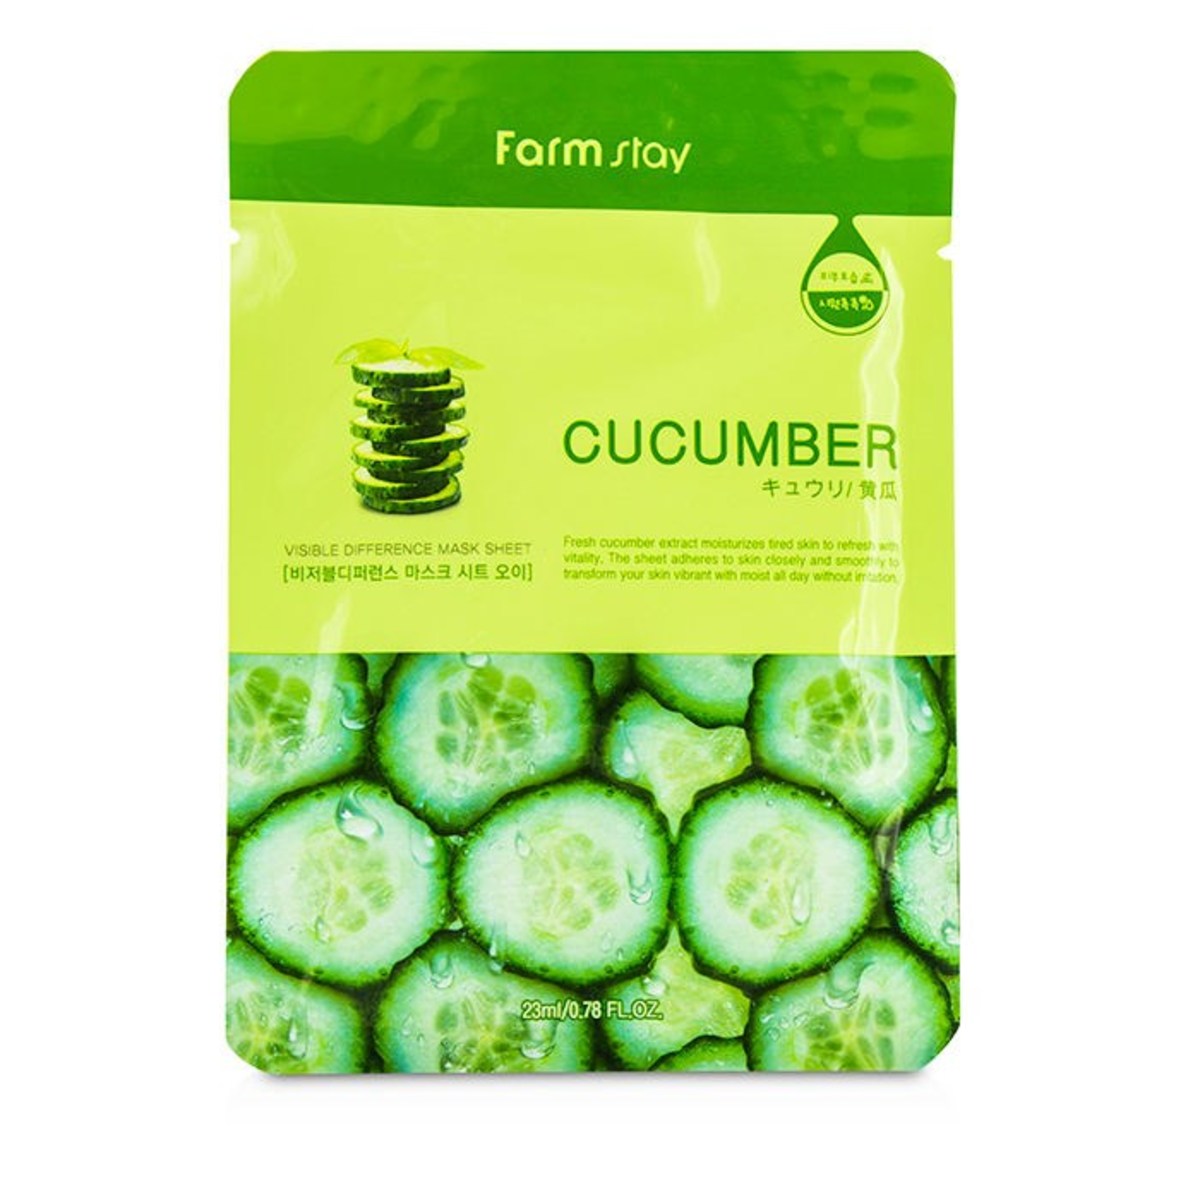 Visible Difference Mask Sheet (Cucumber) (10PCS) (ref:65200)